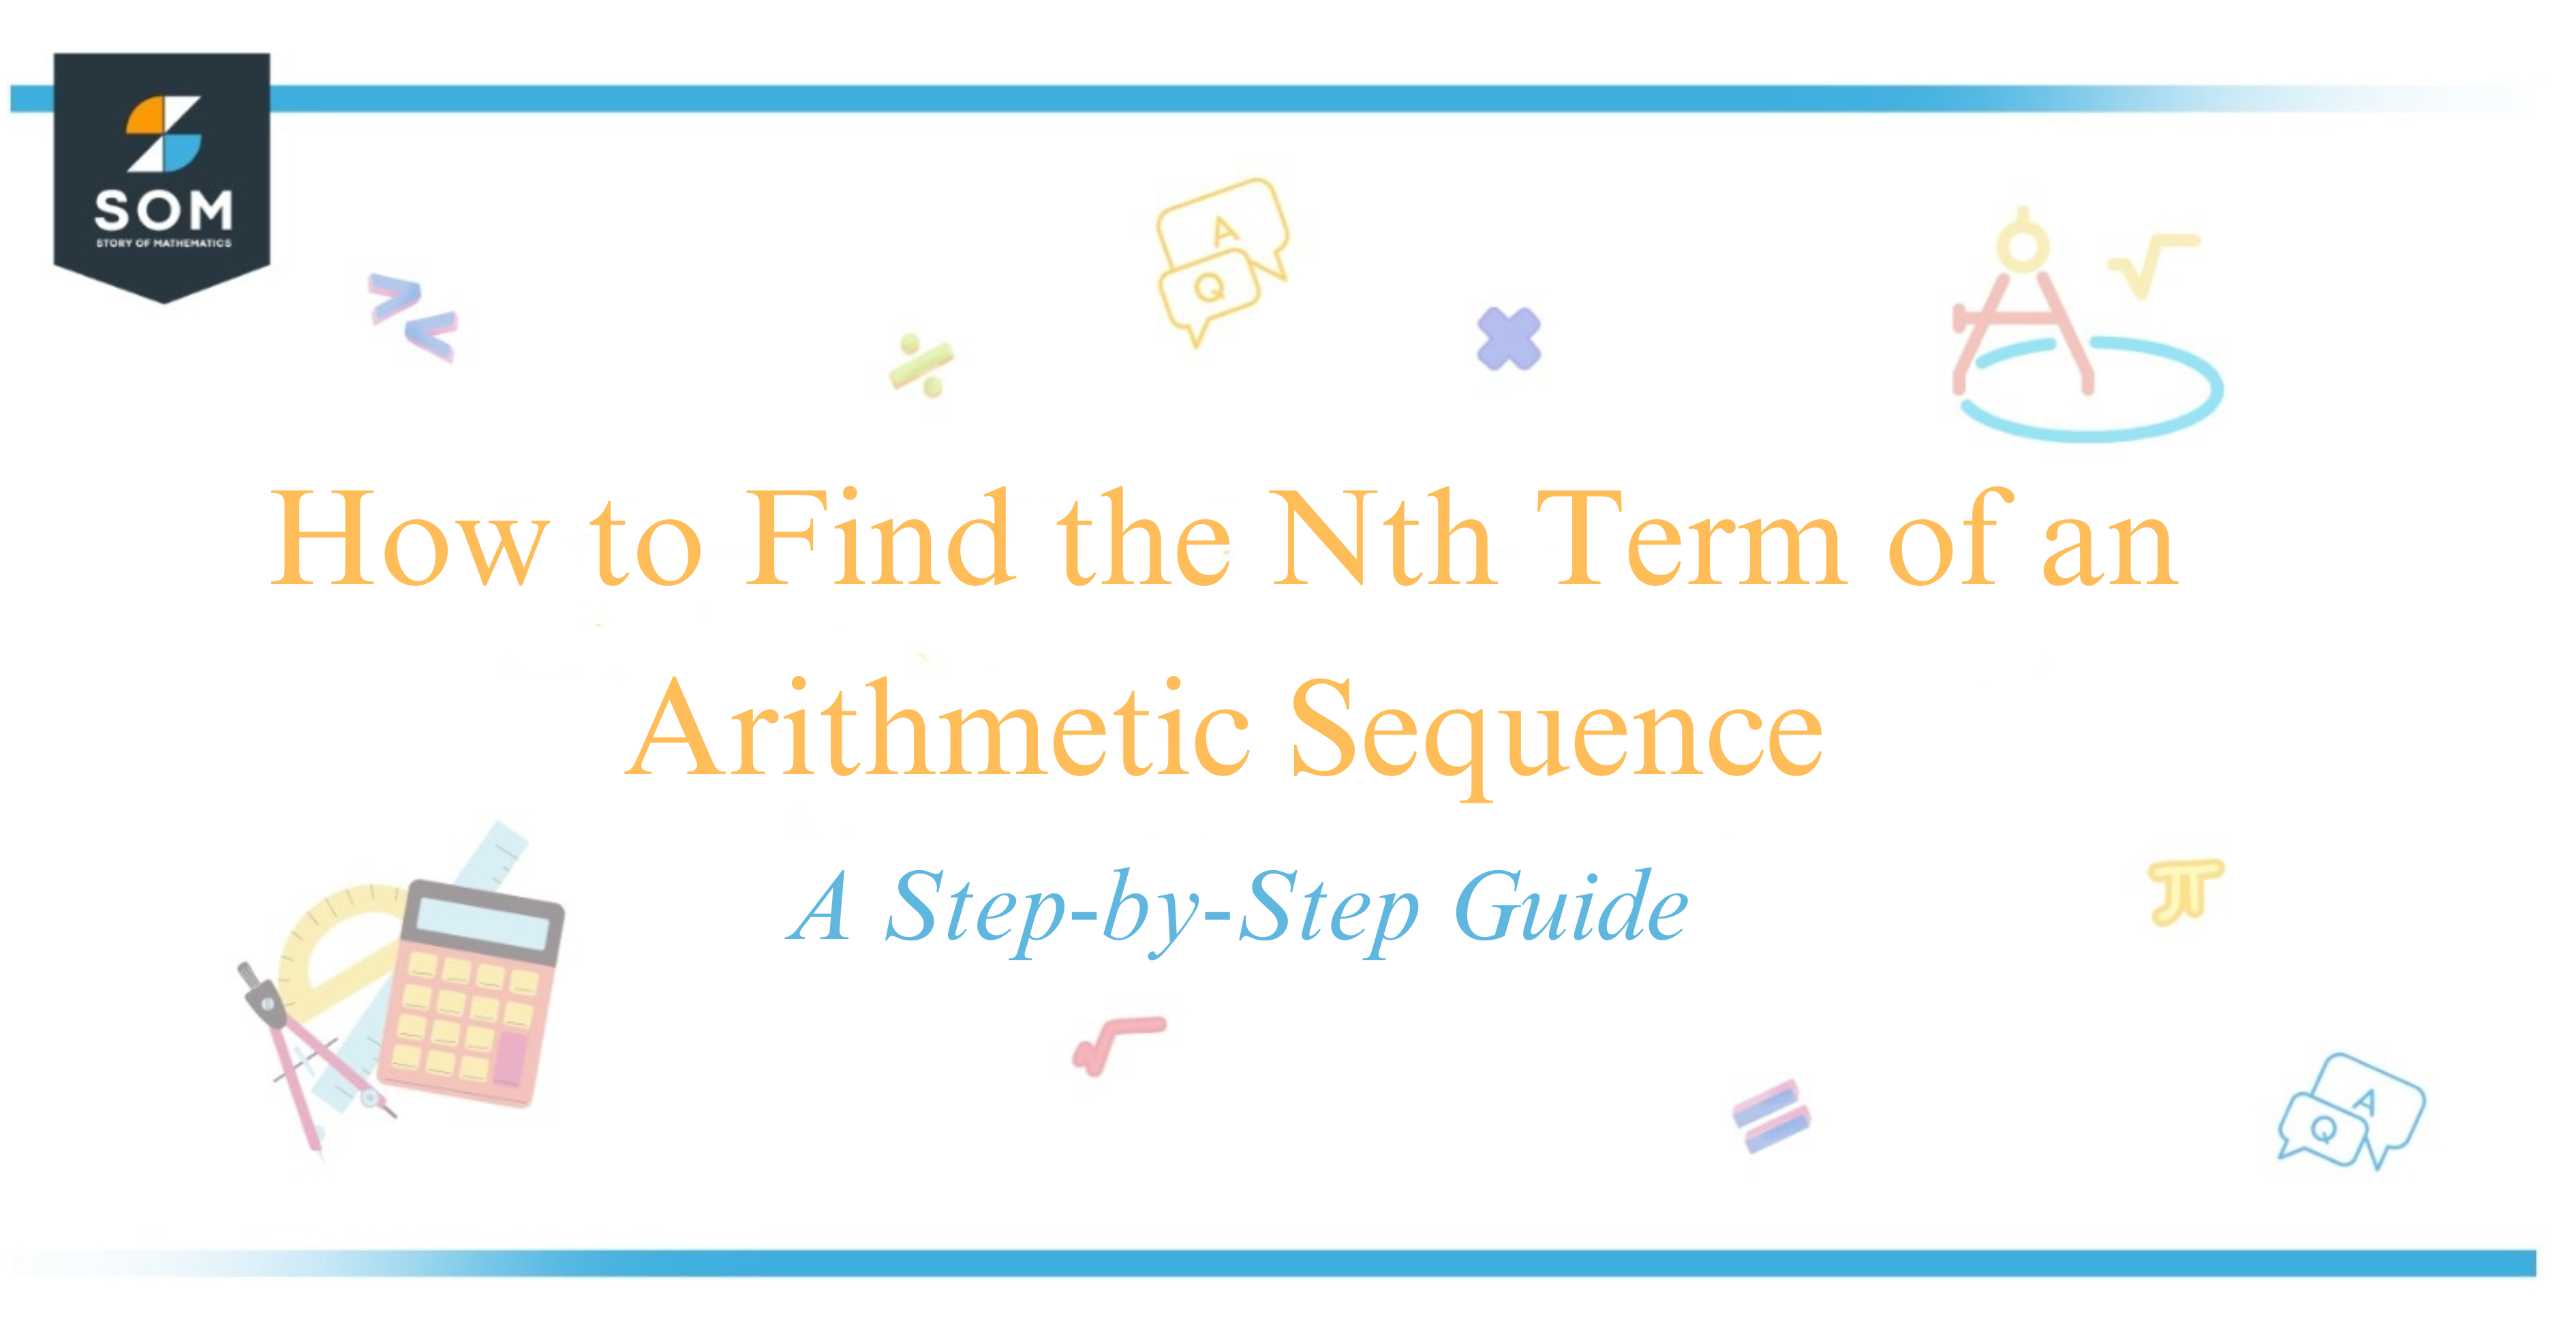 How to Find the Nth Term of an Arithmetic Sequence A Step-by-Step Guide